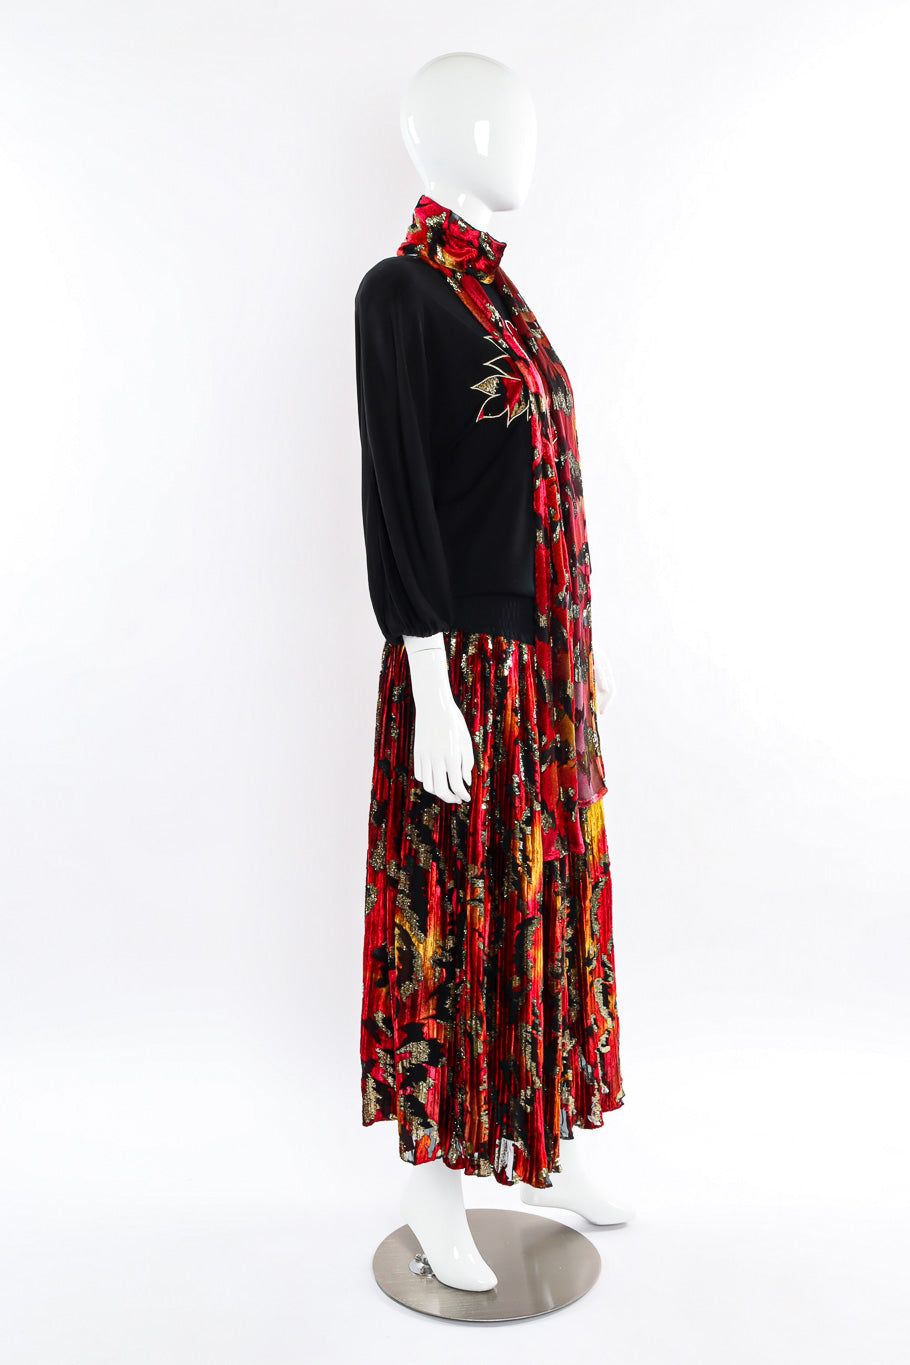 Multi-printed silk limited edition dress by Diane Freis mannequin side full length with scarf @recessla